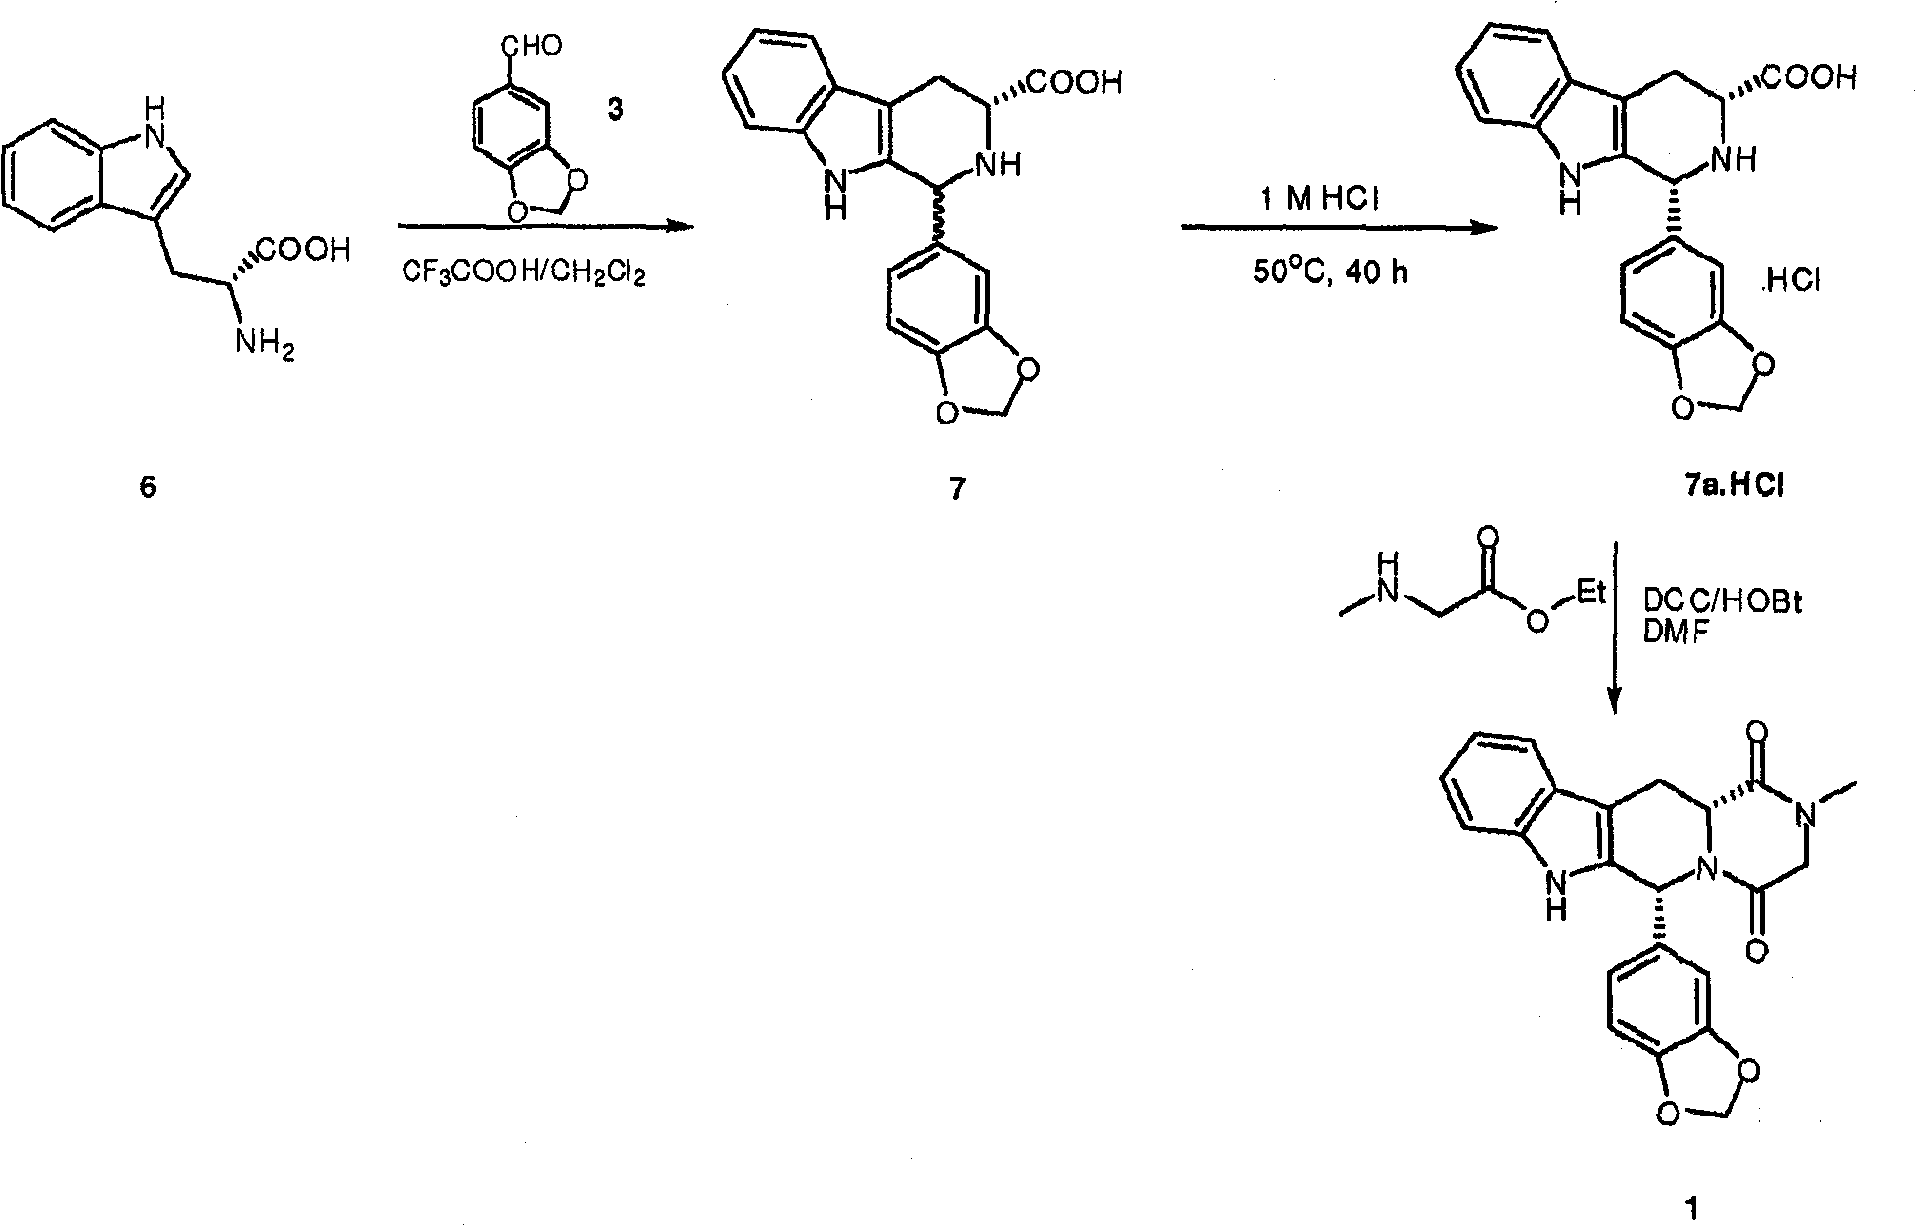 Conversion of tryptophan into beta-carboline derivatives